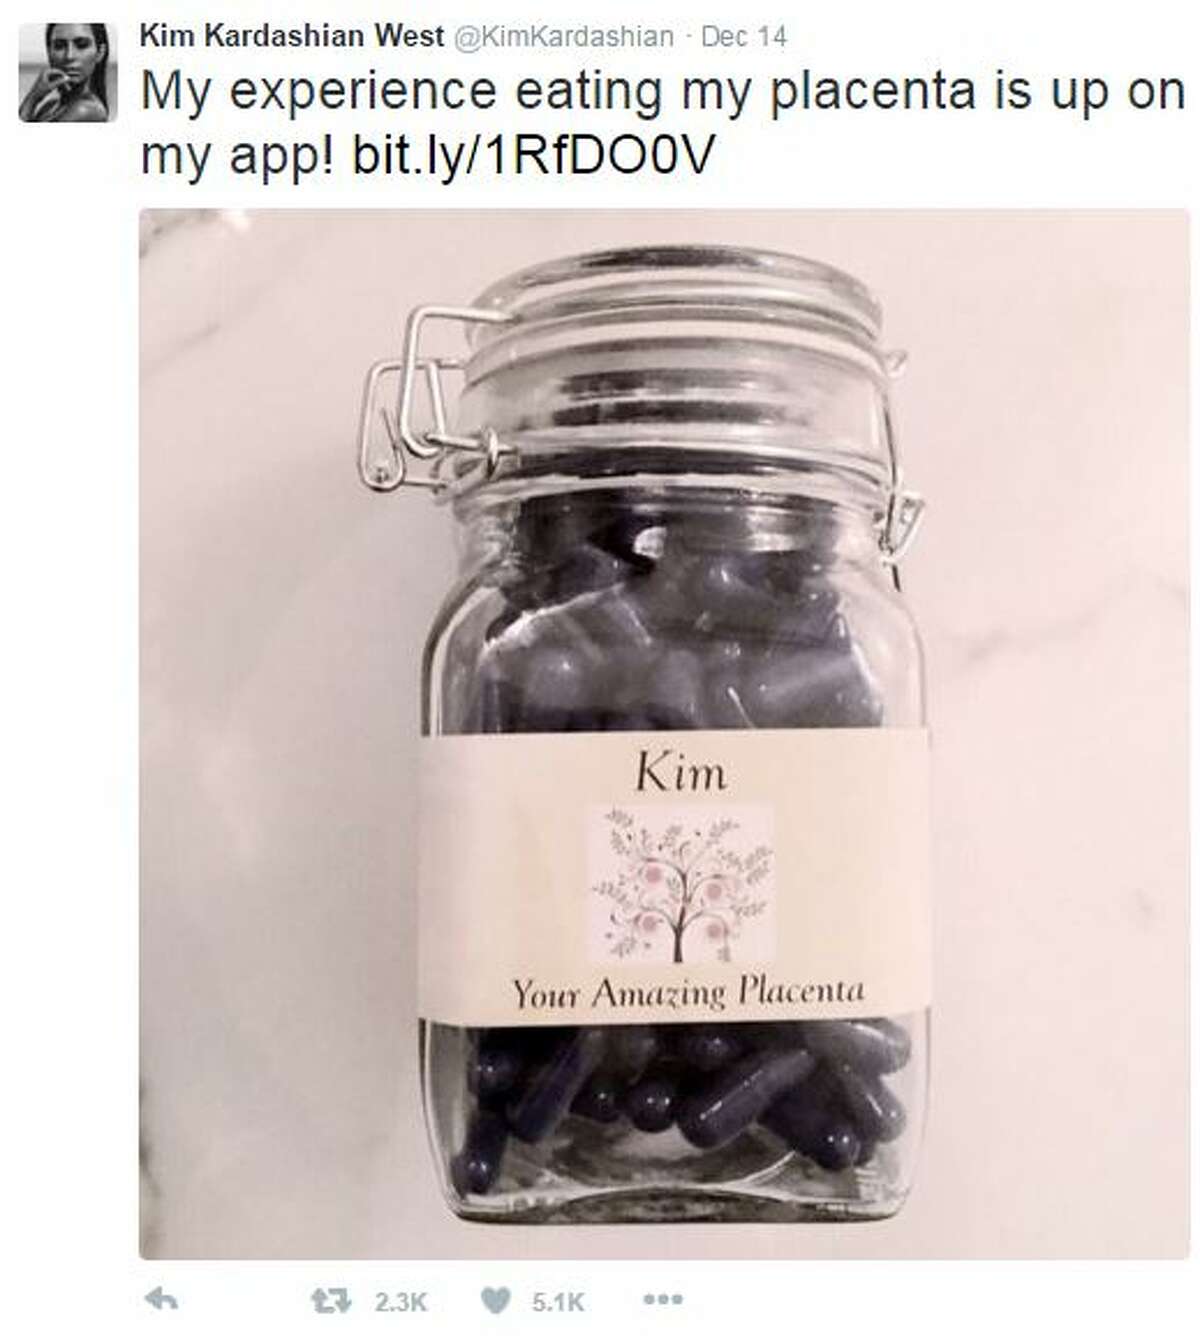 Kim Kardashian shared this photo on her social media sites of her placenta, which has been freeze-dried and ground into a pill form.